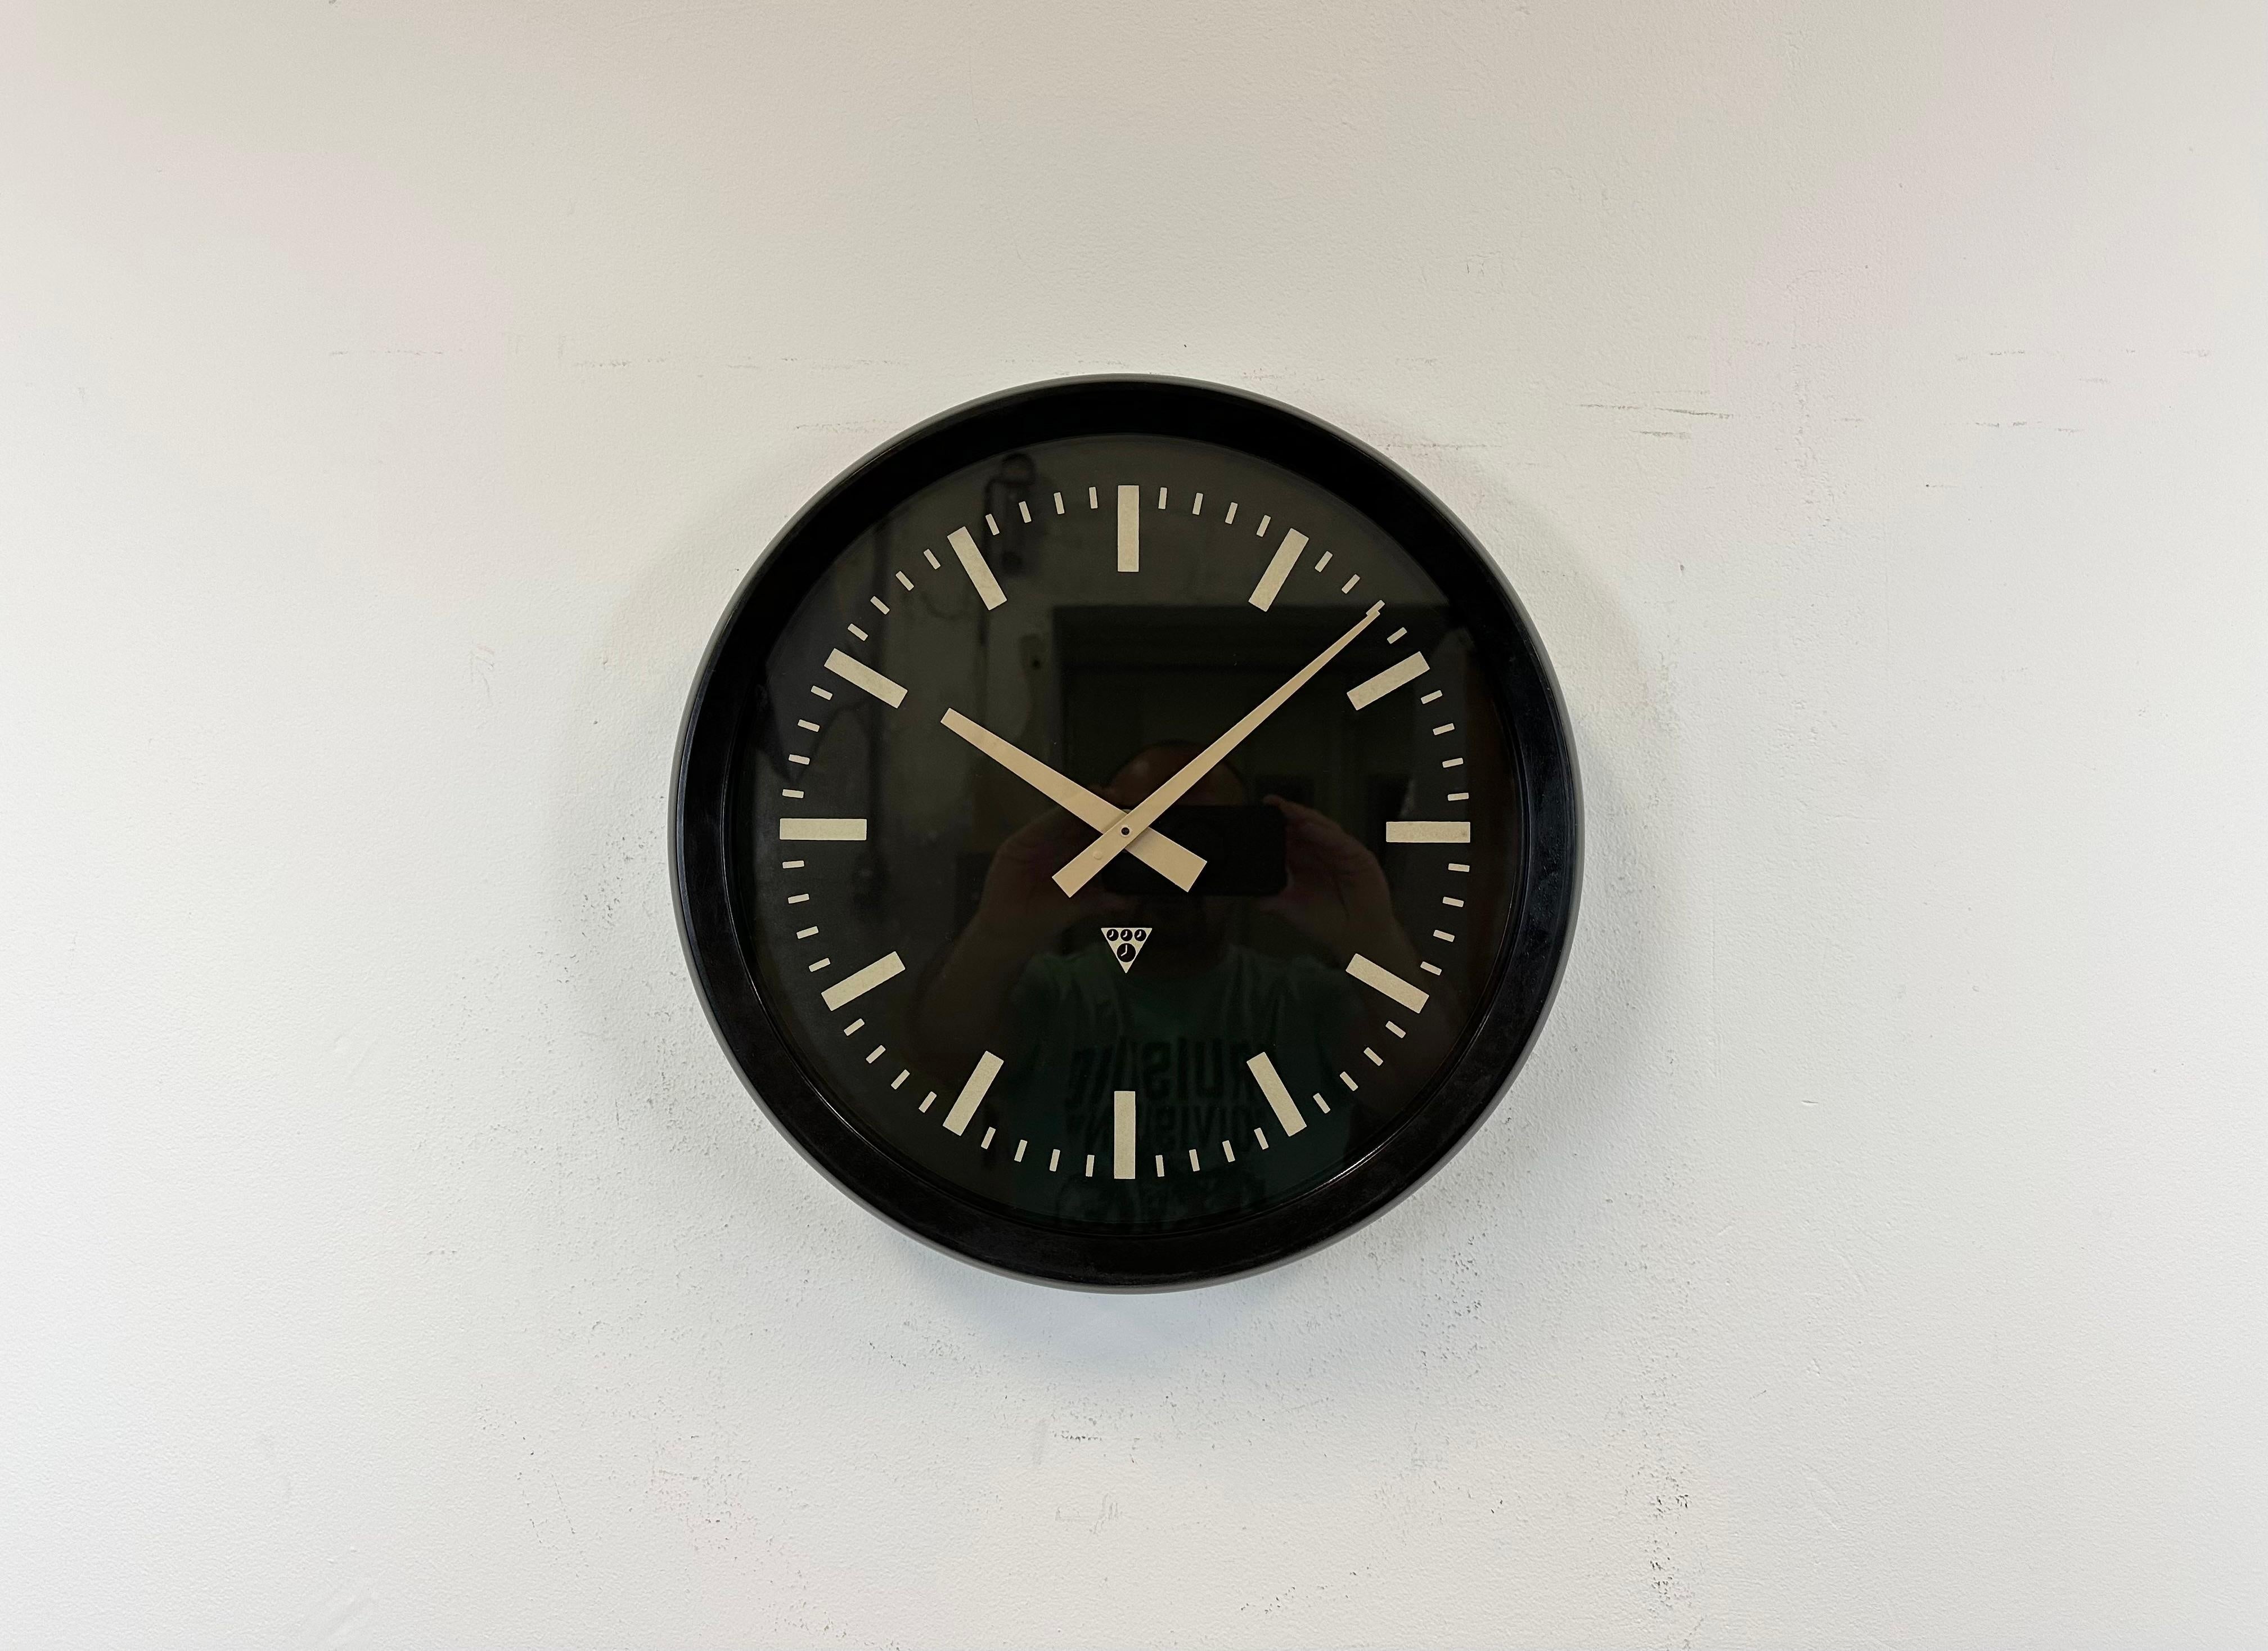 This wall clock was produced by Pragotron in former Czechoslovakia during the 1970s. The piece features a dark brown (black) bakelite frame, a black bakelite dial, an aluminum hands and a clear glass cover. The piece has been converted into a